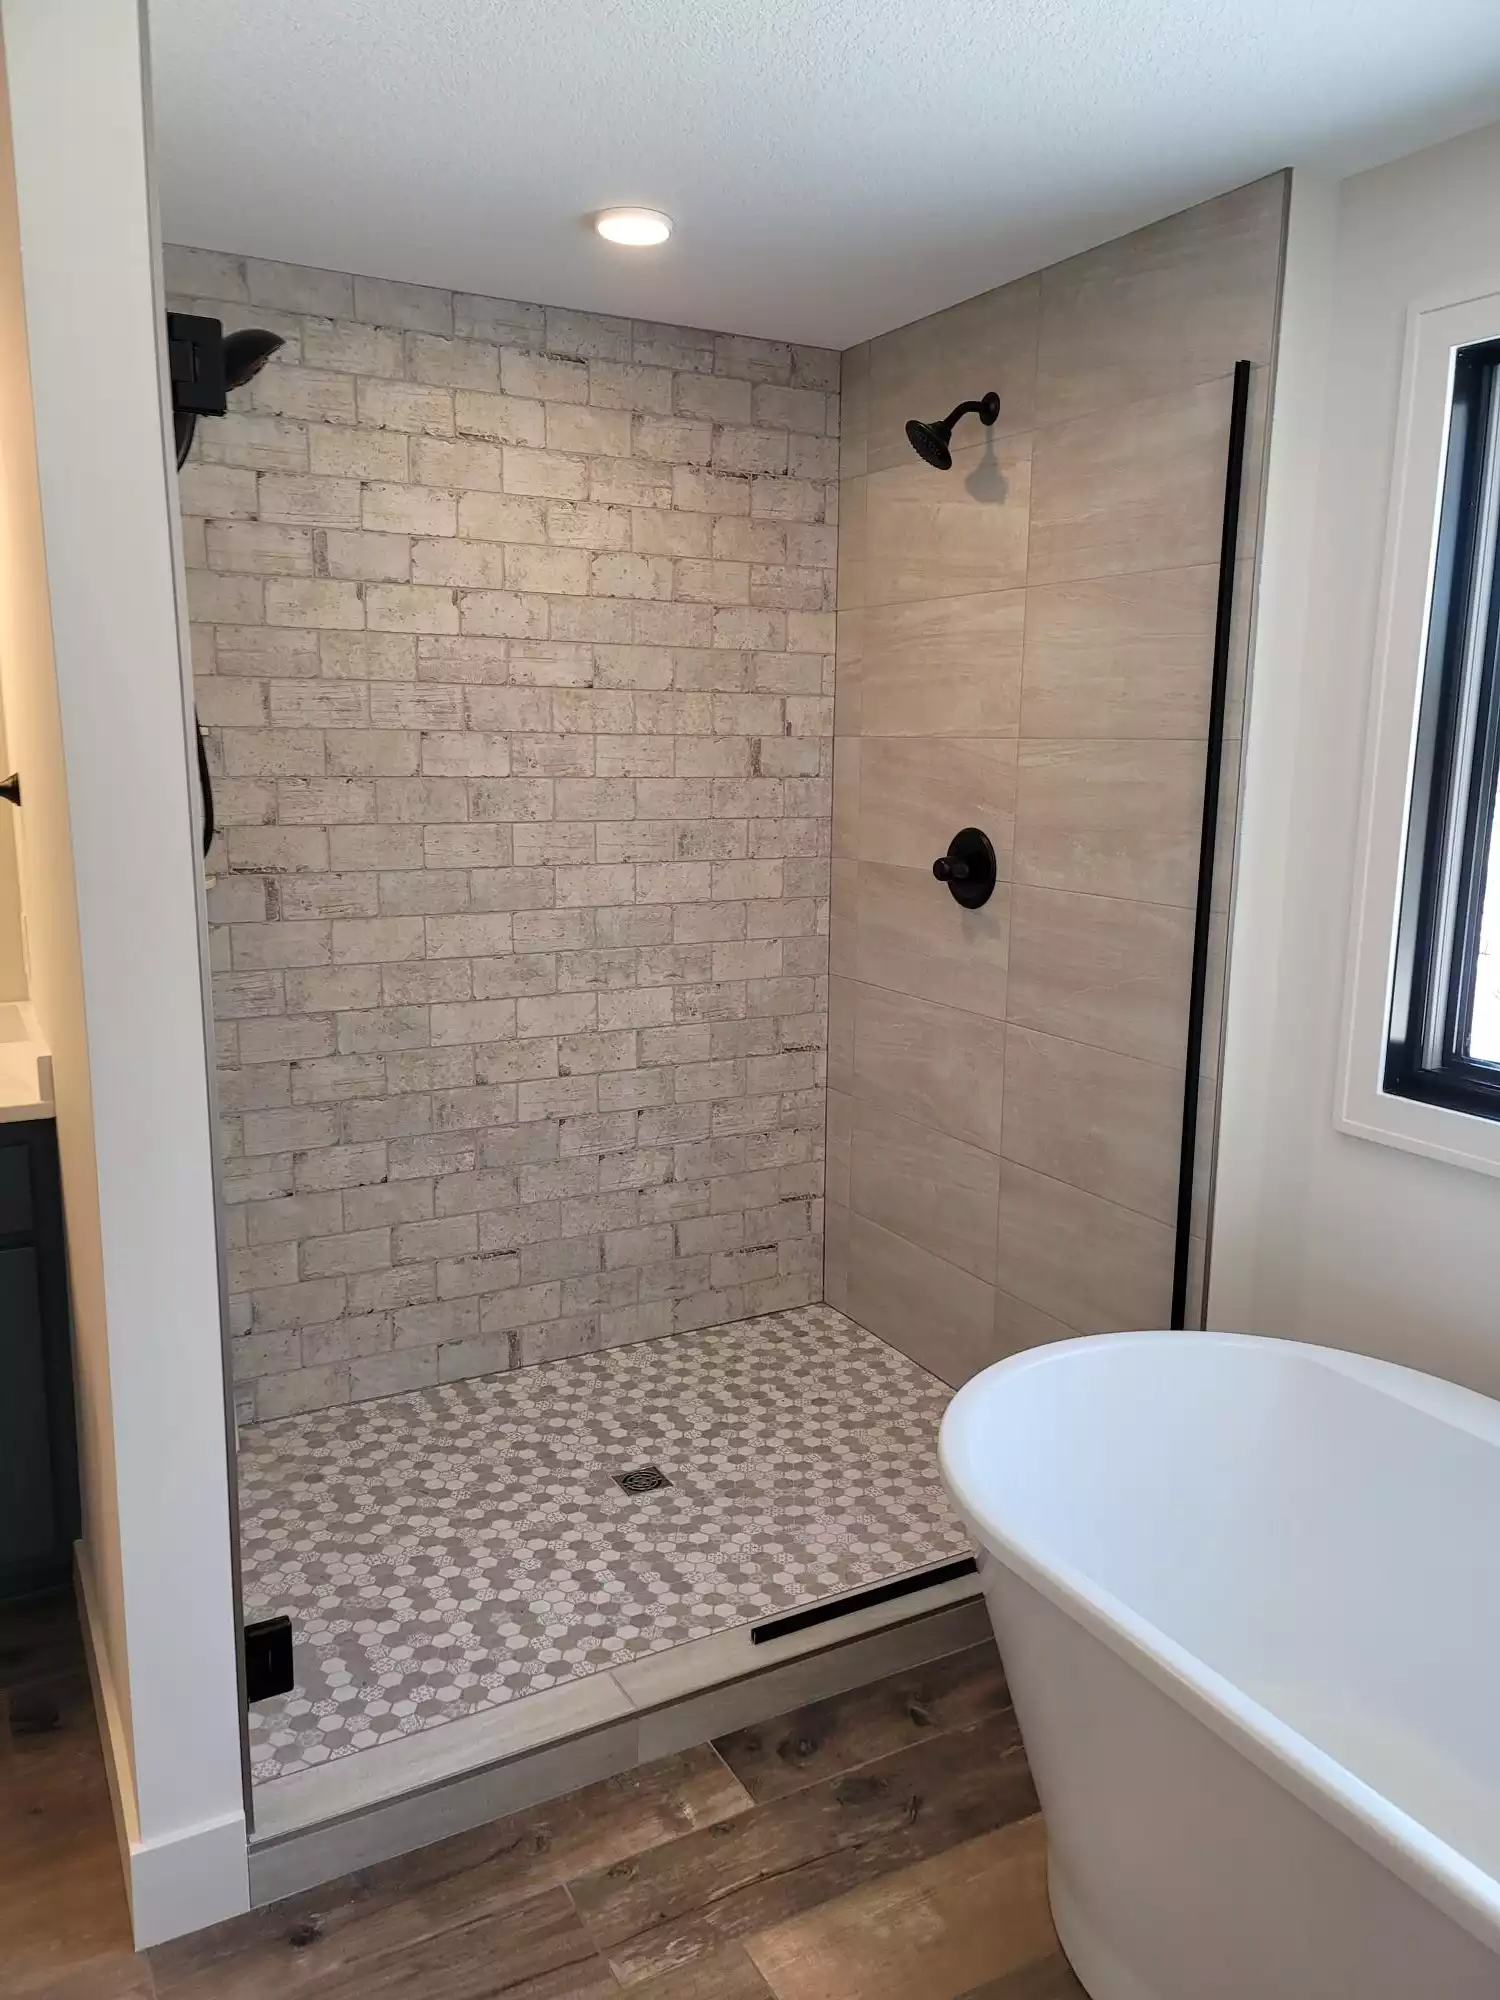 Huge tile and brick shower also free standing tub